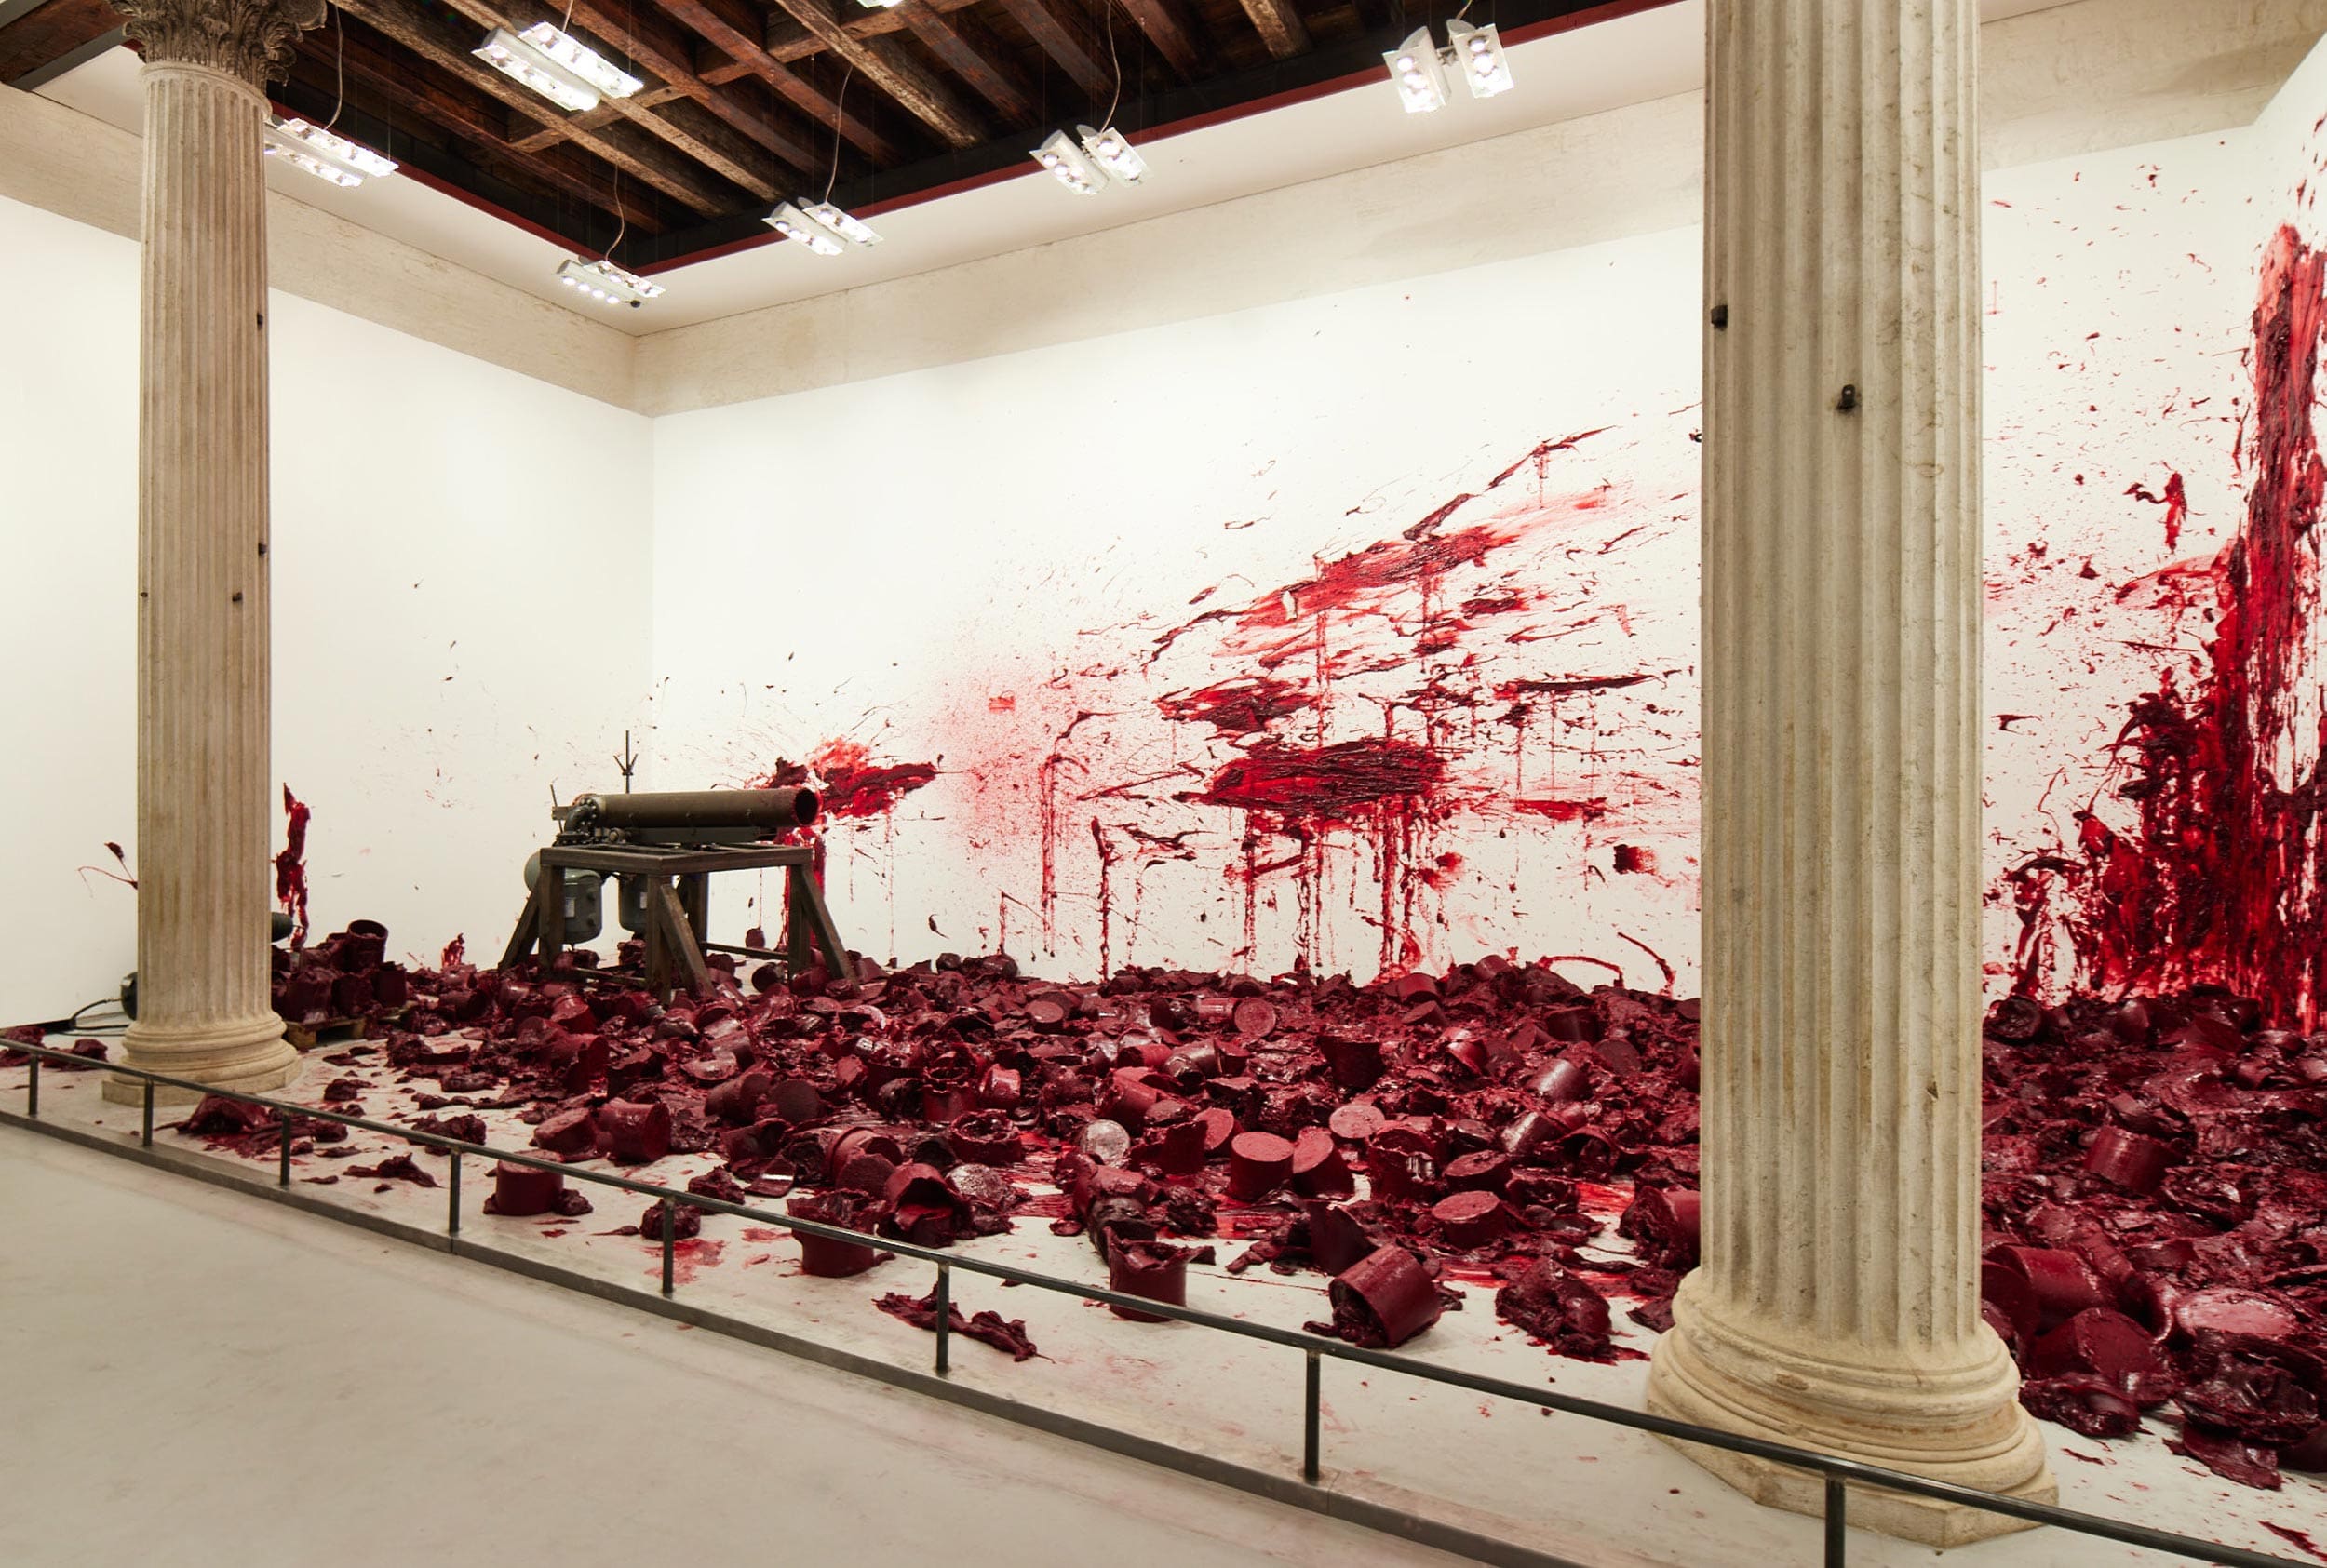 Anish-Kapoor GALLERIE DELL’ACCADEMIA